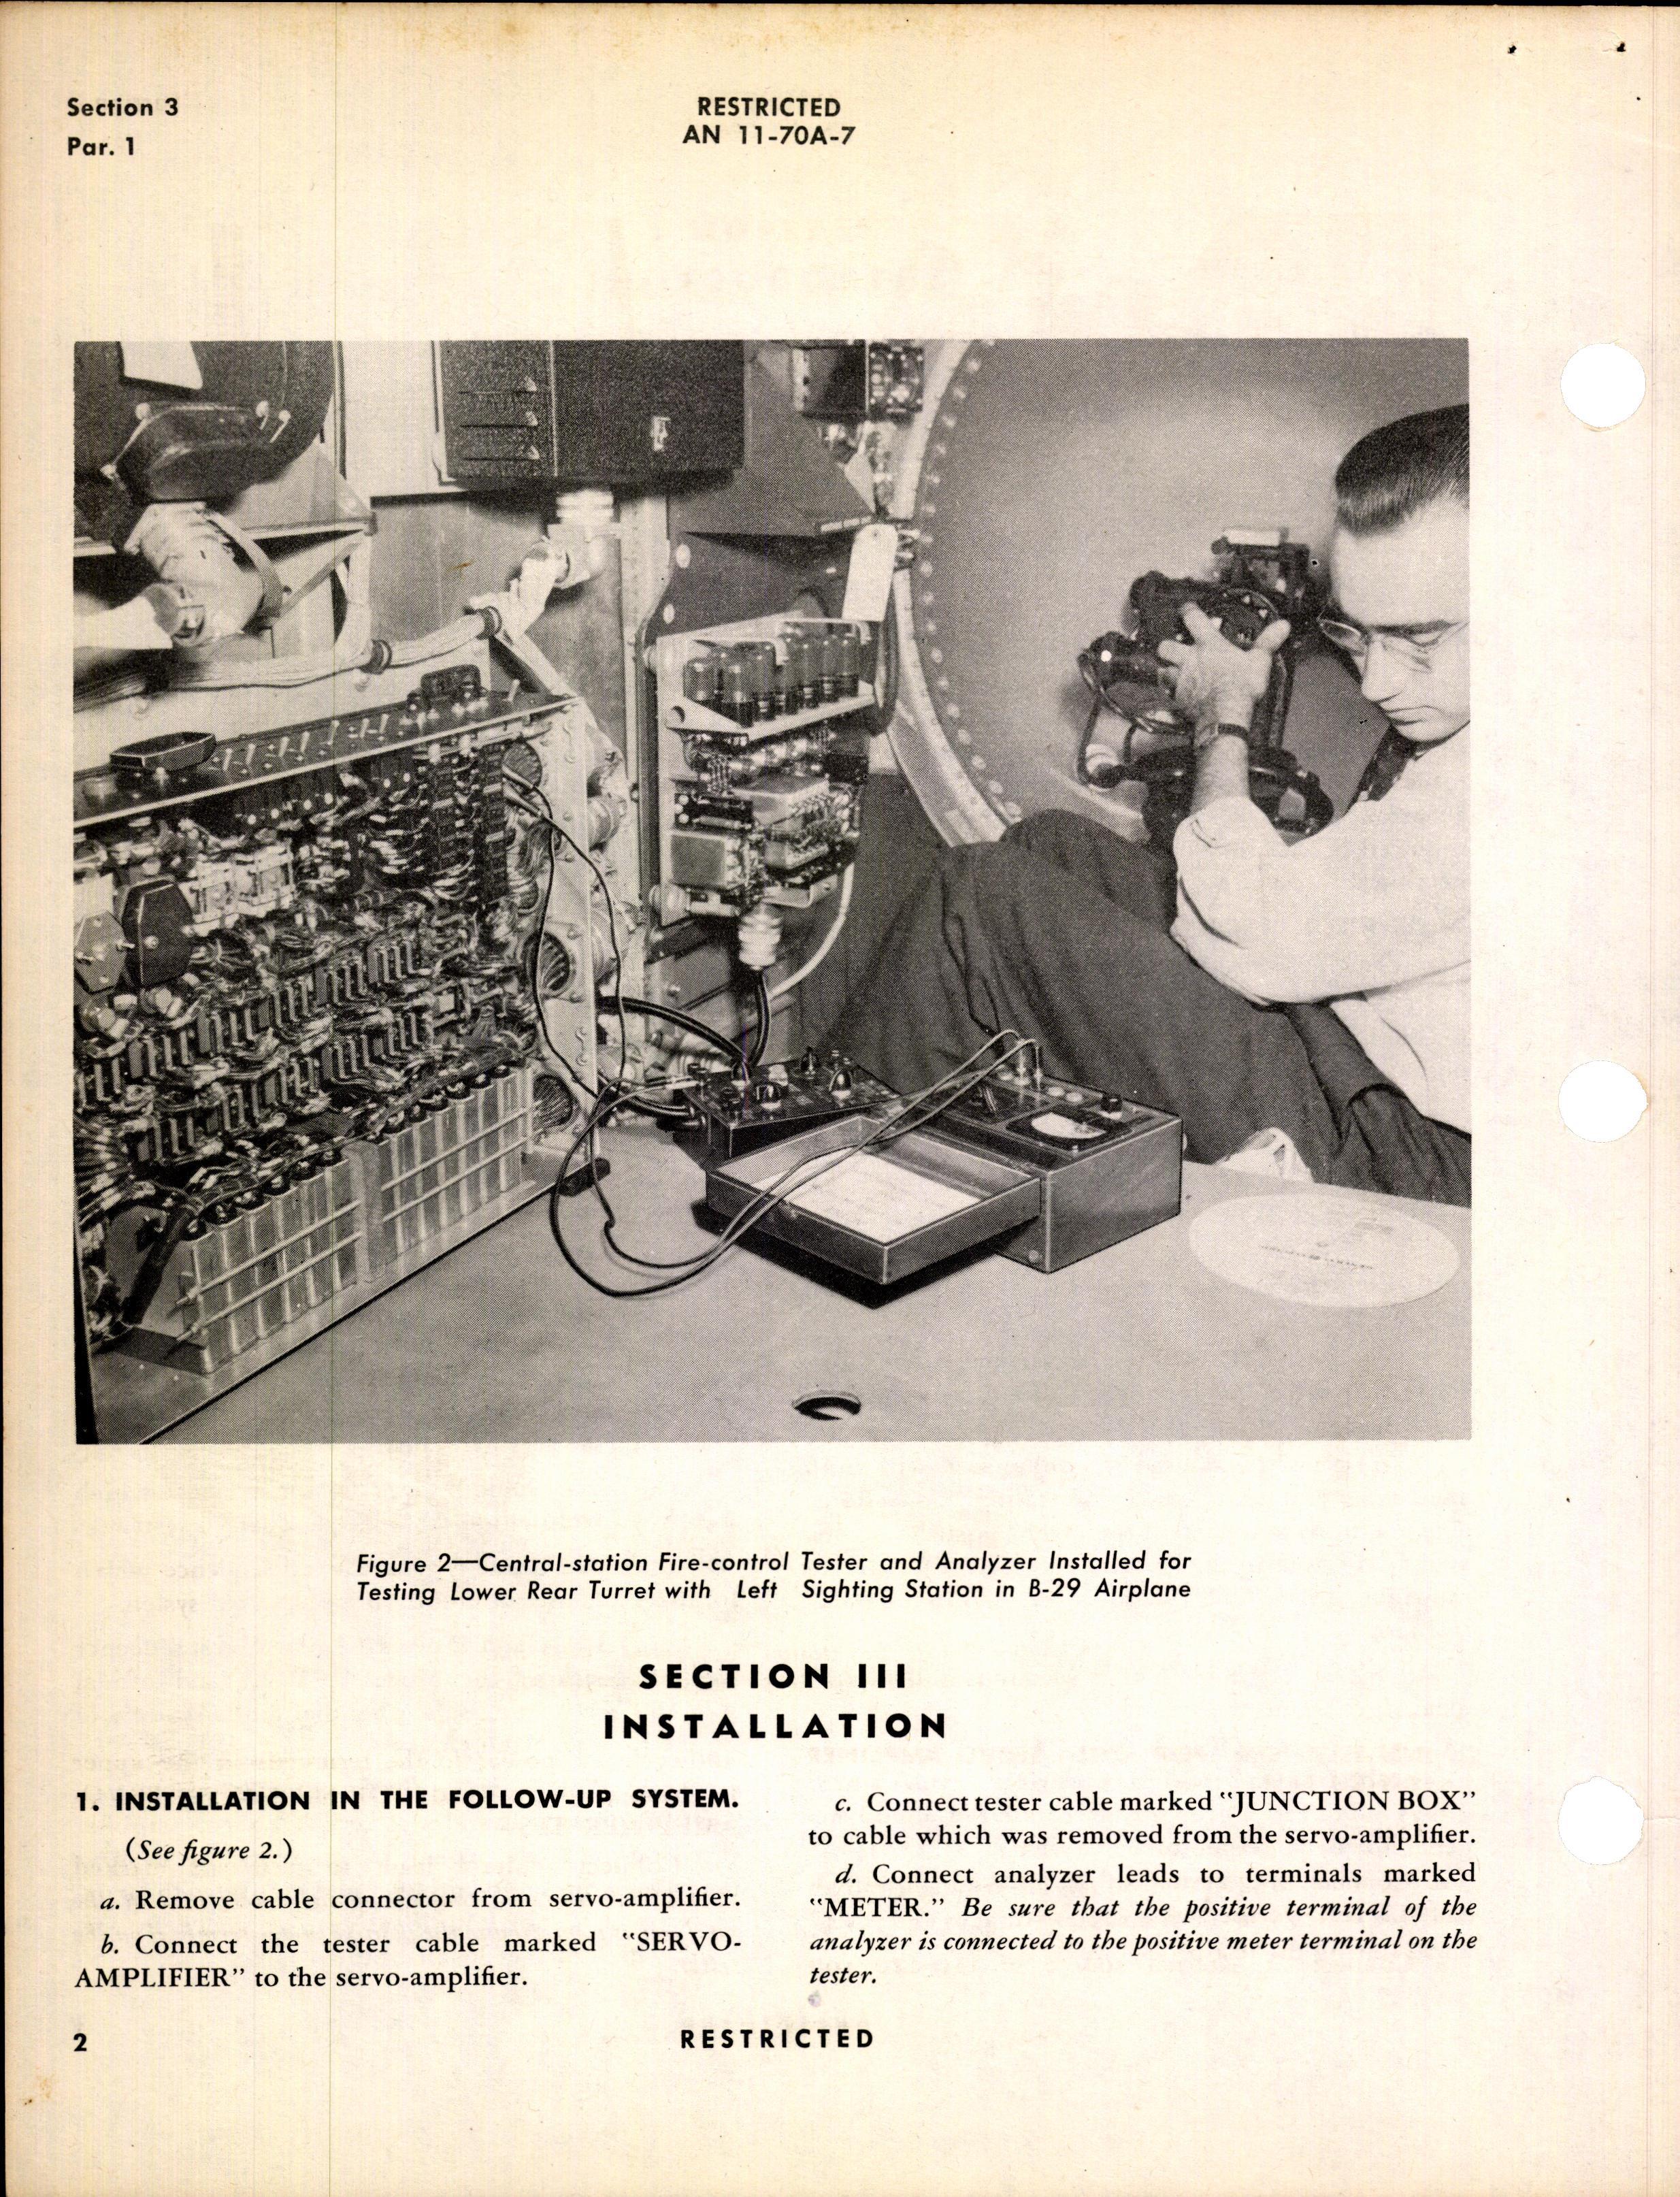 Sample page 6 from AirCorps Library document: Operation & Service Instructions for Central-Station Fire-Control Tester